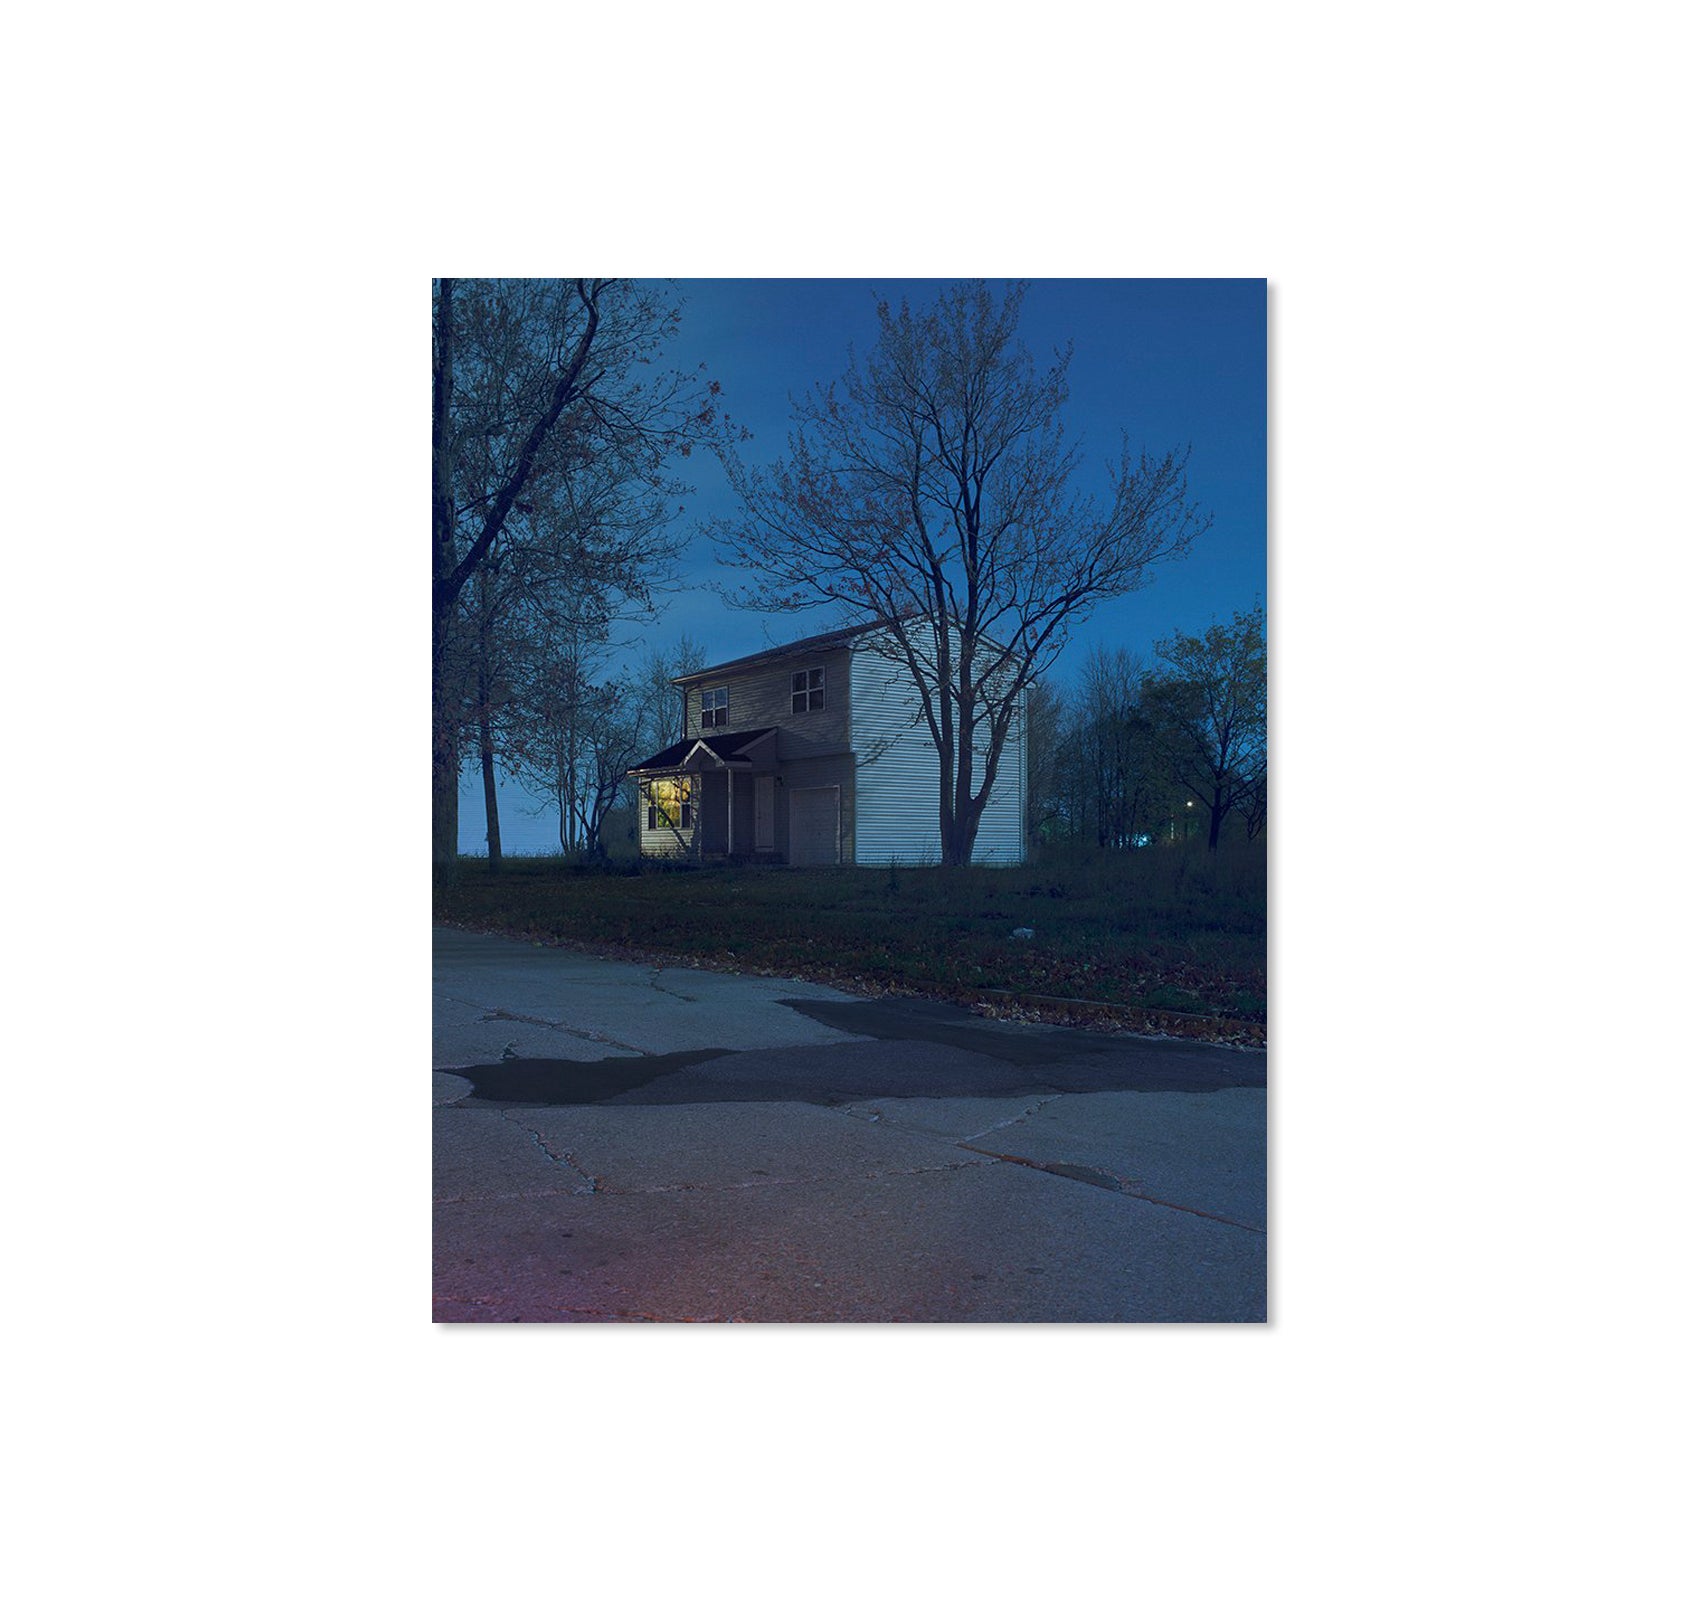 ONE PICTURE BOOK TWO #34: UNTITLED #2319-B-DMF by Todd Hido